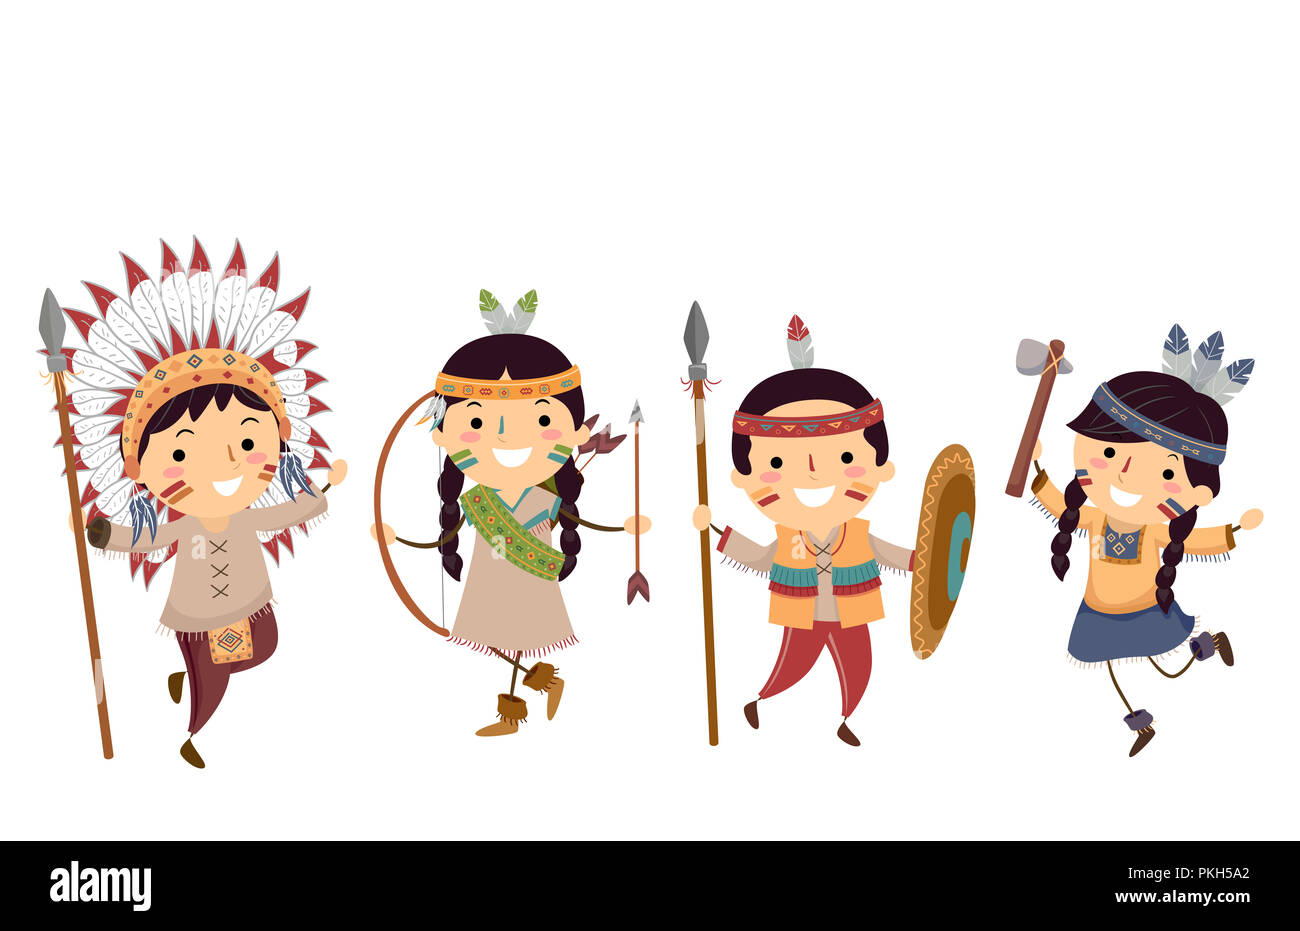 Illustration of Stickman Kids Wearing Different Native American Costumes Stock Photo